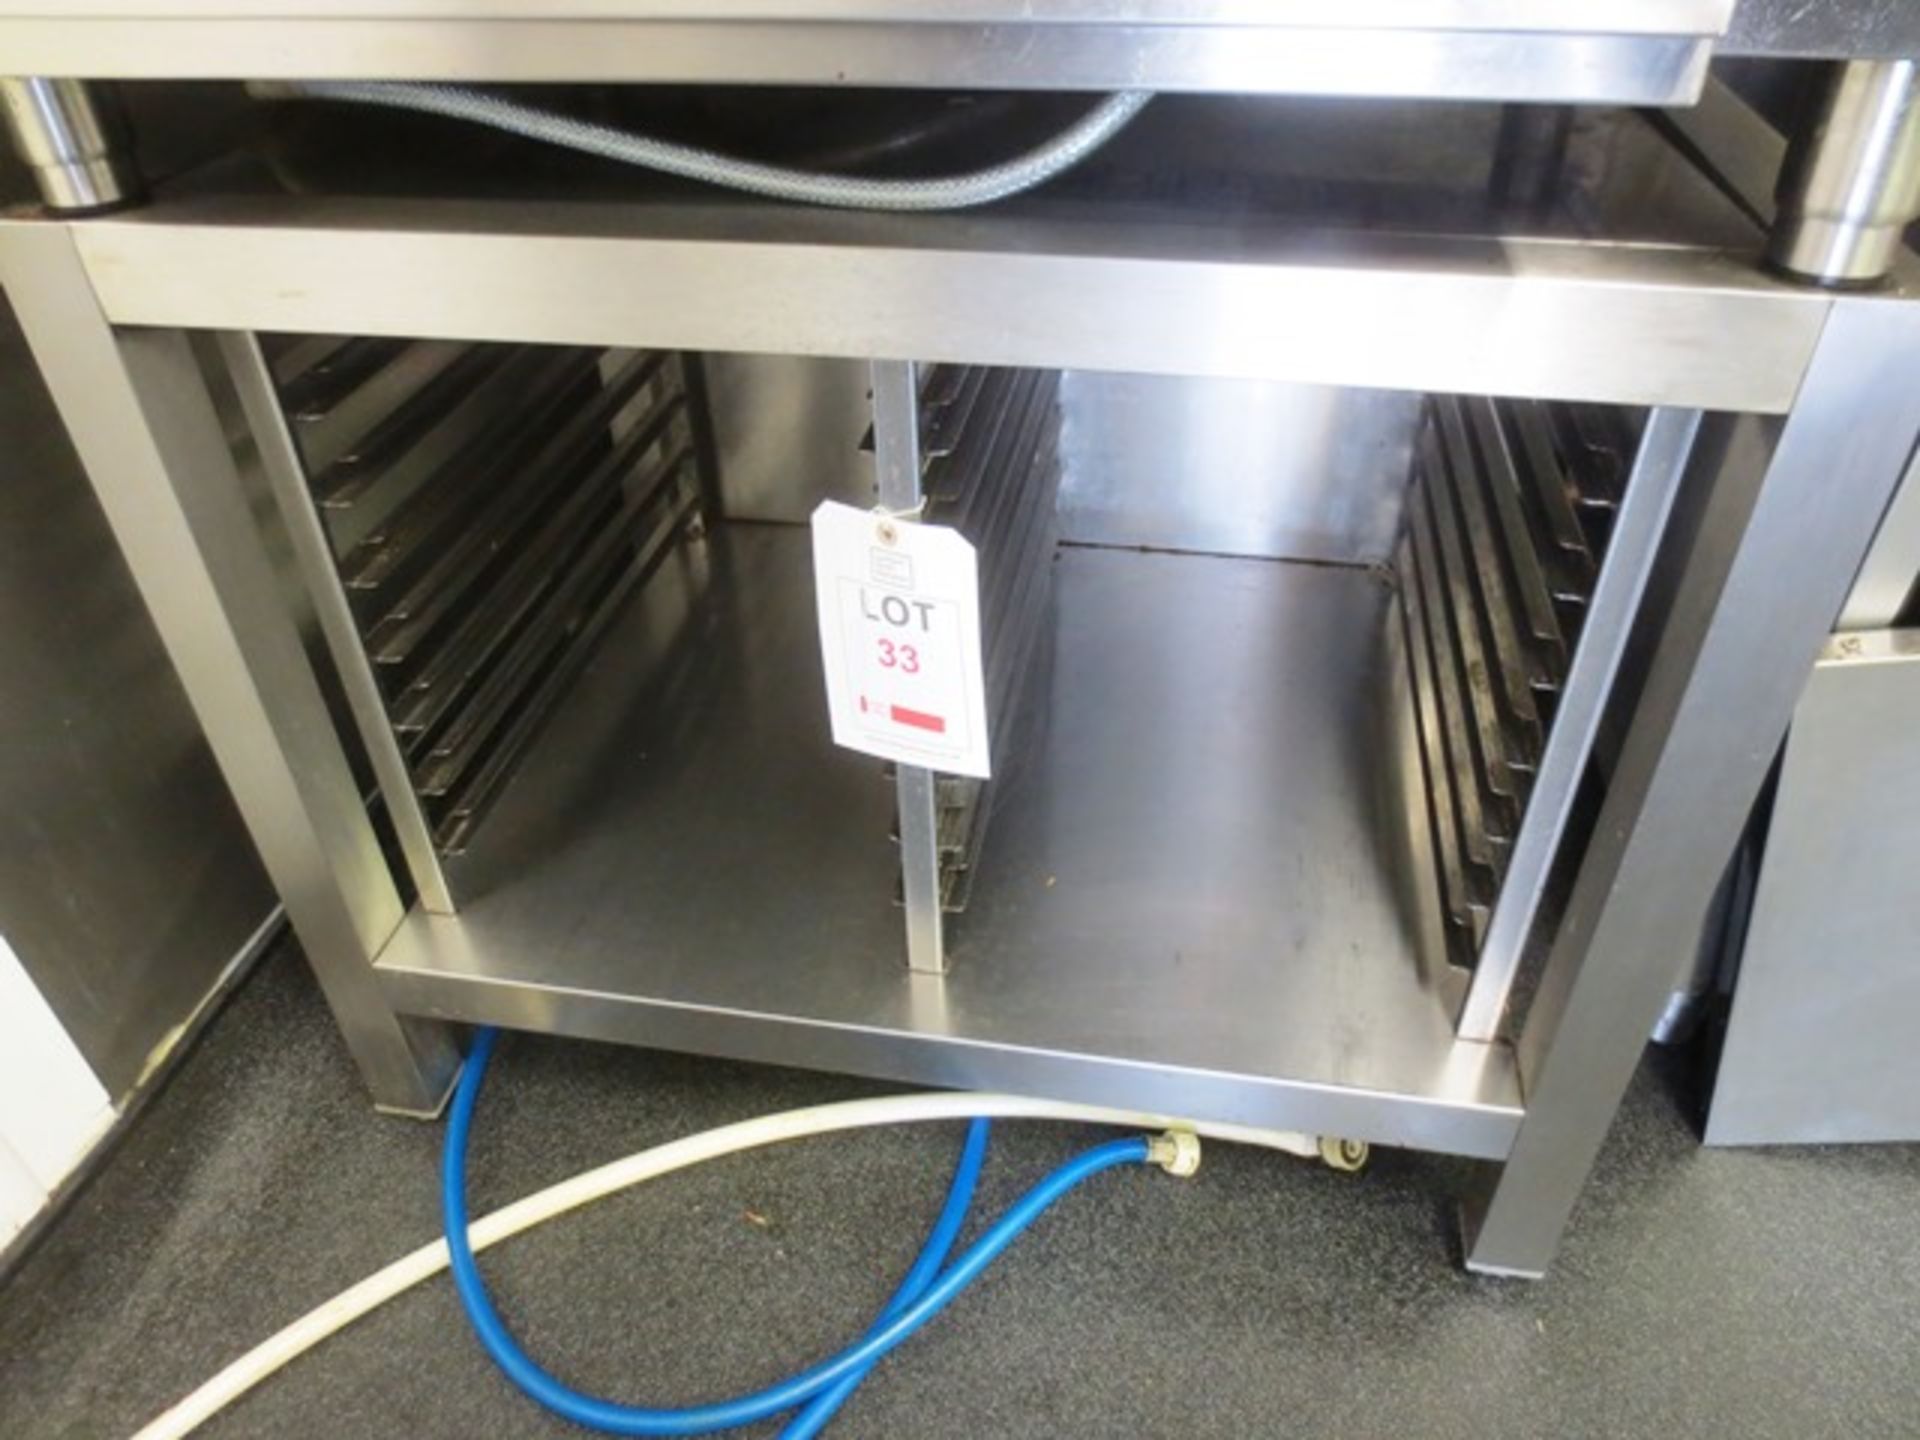 Stainless steel 14 tray capacity, under counter unit, approx dimensions: 860 x 660mm - Image 2 of 2